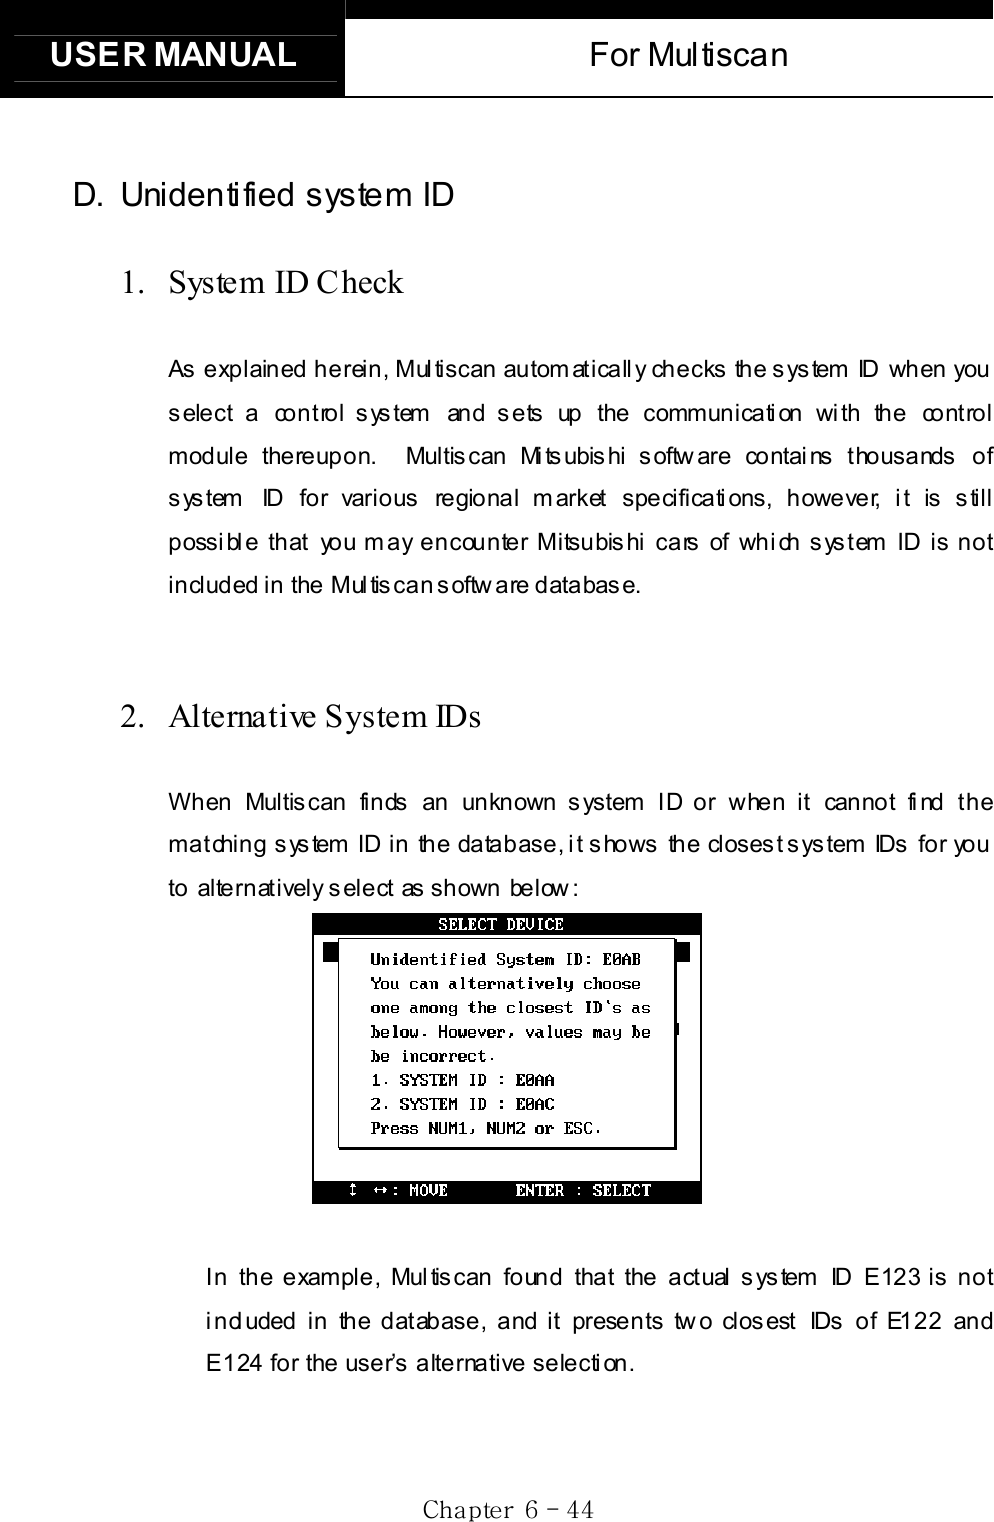 USER MANUAL  For Multiscan Gj G]G TG[[GD. Unidentified system ID 1. System ID Check As explained herein, Multiscan automatically checks the system ID when you select a control system and sets up the communication with the control module thereupon.  Multiscan Mitsubishi software contains thousands of system  ID for various regional market specifications, however, it is still possible that you may encounter Mitsubishi cars of which system ID is not included in the Mul tis can softw are databas e. 2.  Alternative System IDs   When Multiscan finds an unknown system ID or when it cannot find the matching system  ID in the database, it shows the closest system IDs for you to alternatively s elect as shown below :     In the example, Multiscan found that the actual system ID E123 is not i ncl uded in the database, and it presents tw o clos est IDs of E122 and E124 for the user’s alternative selection.   